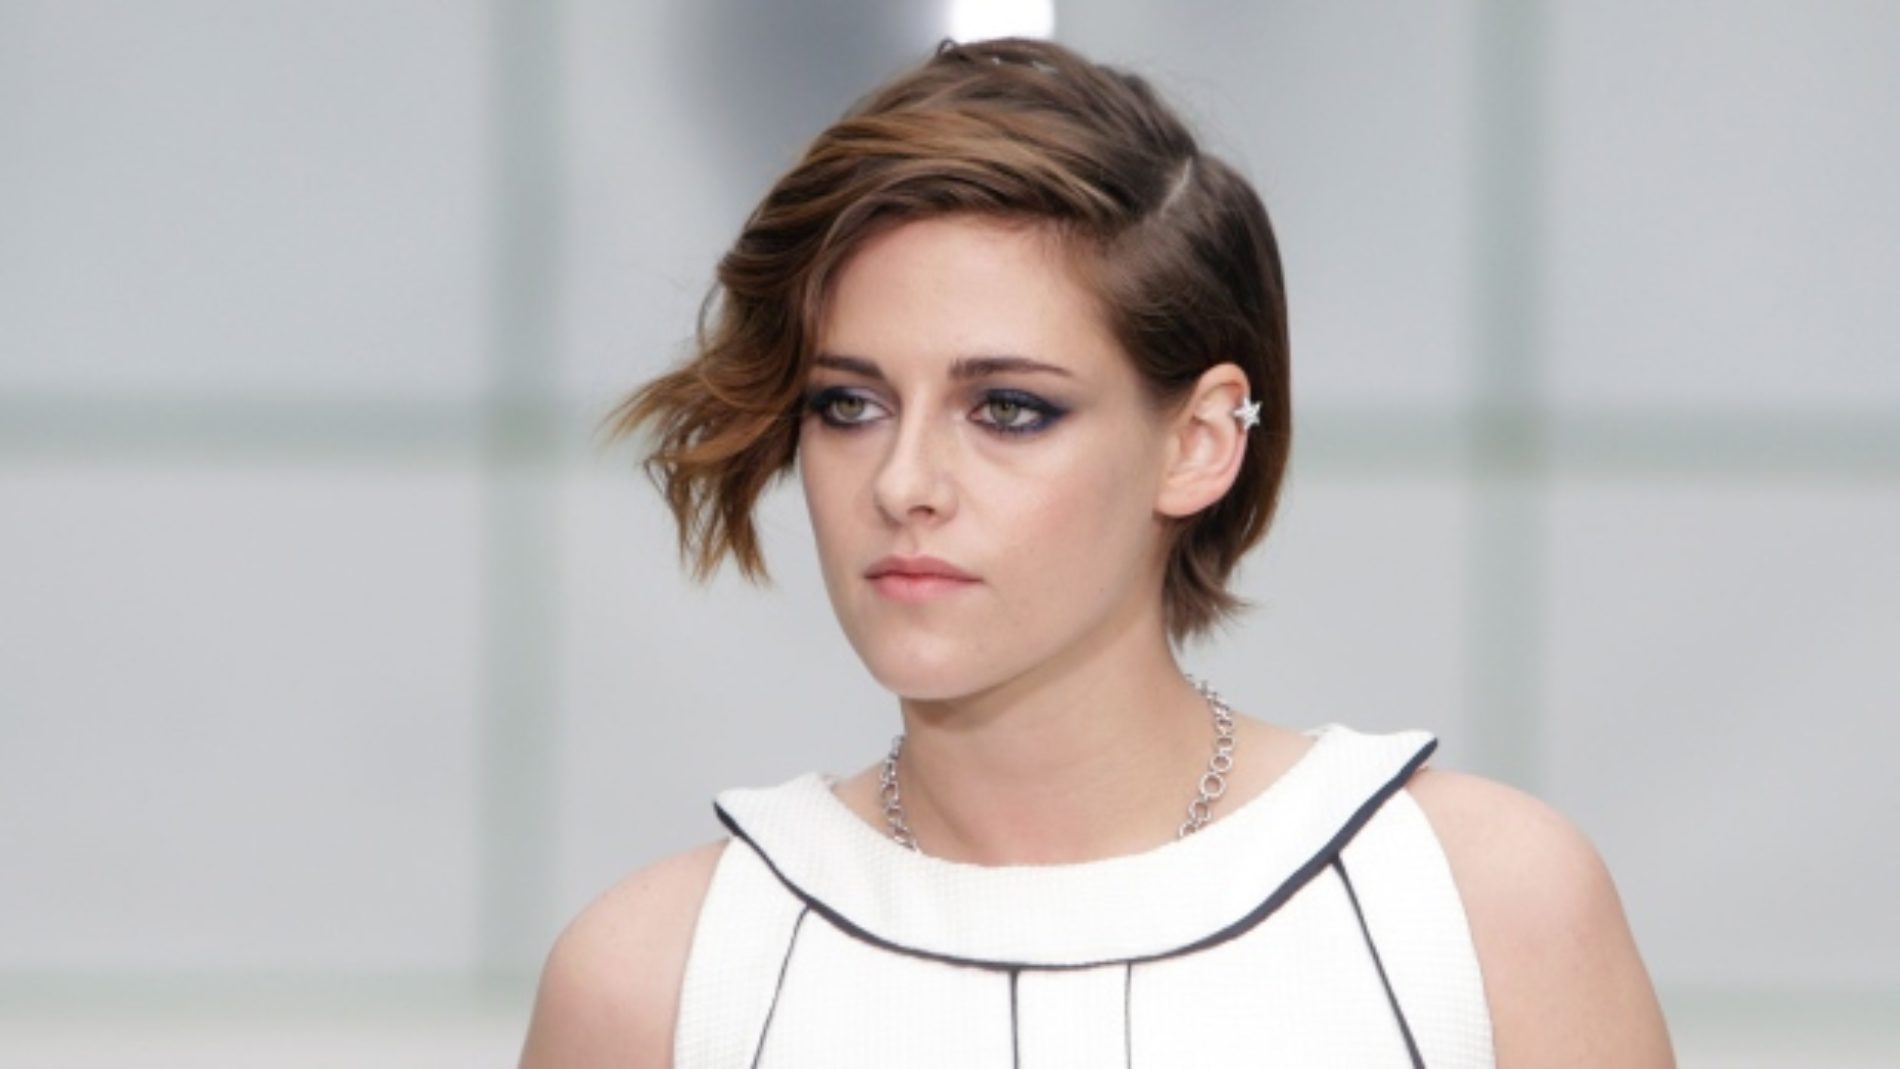 Kristen Stewart Talks About Her Sexual Orientation, Says She’s Not Hiding